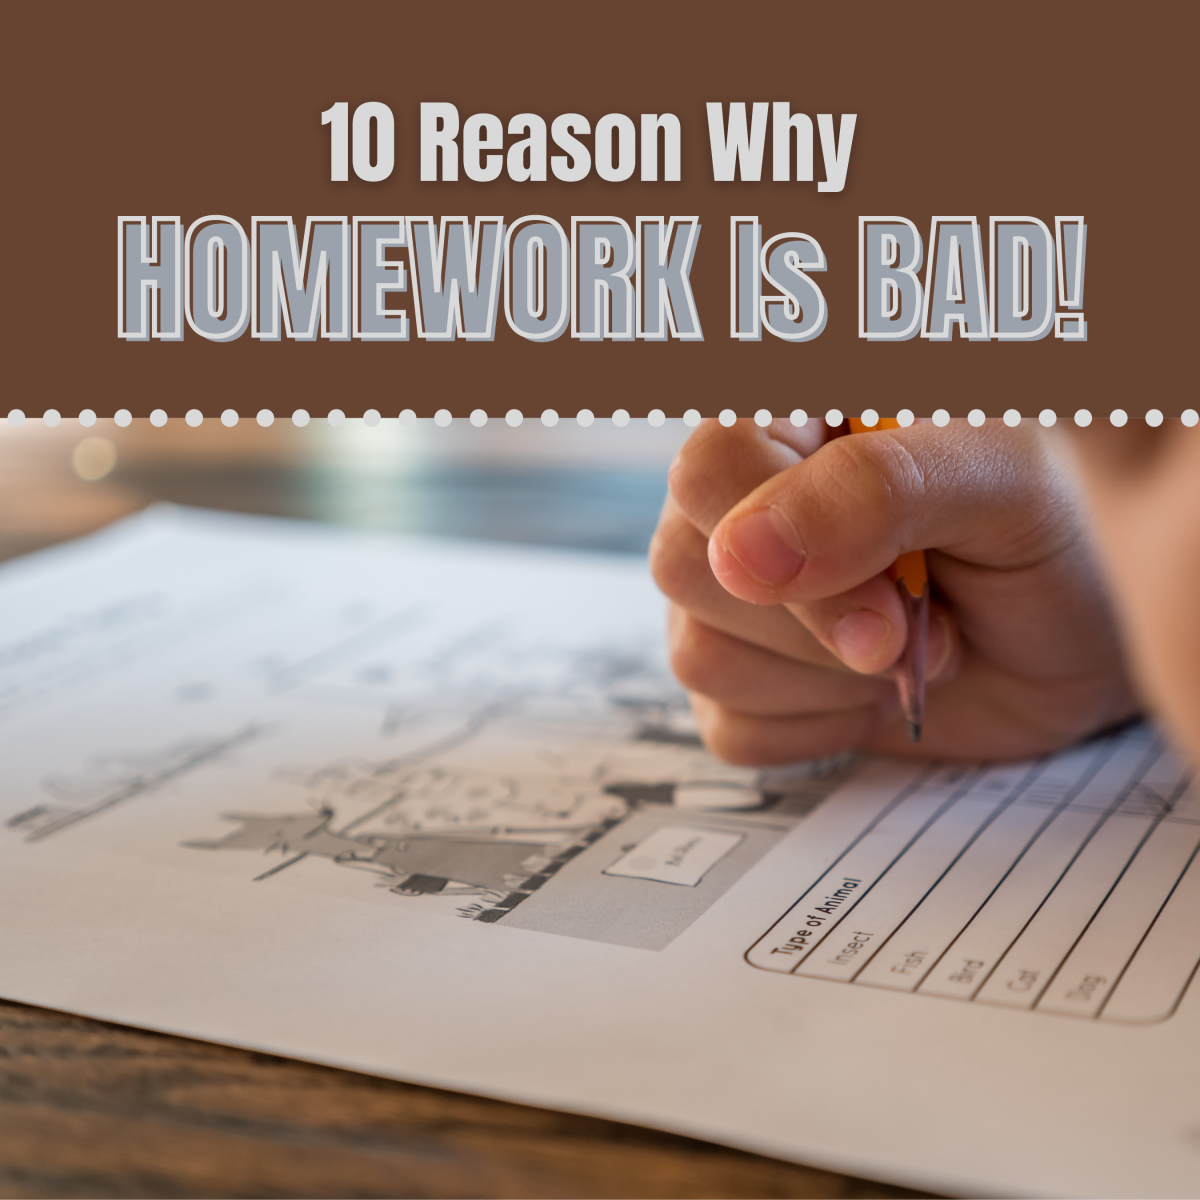 research that homework is bad